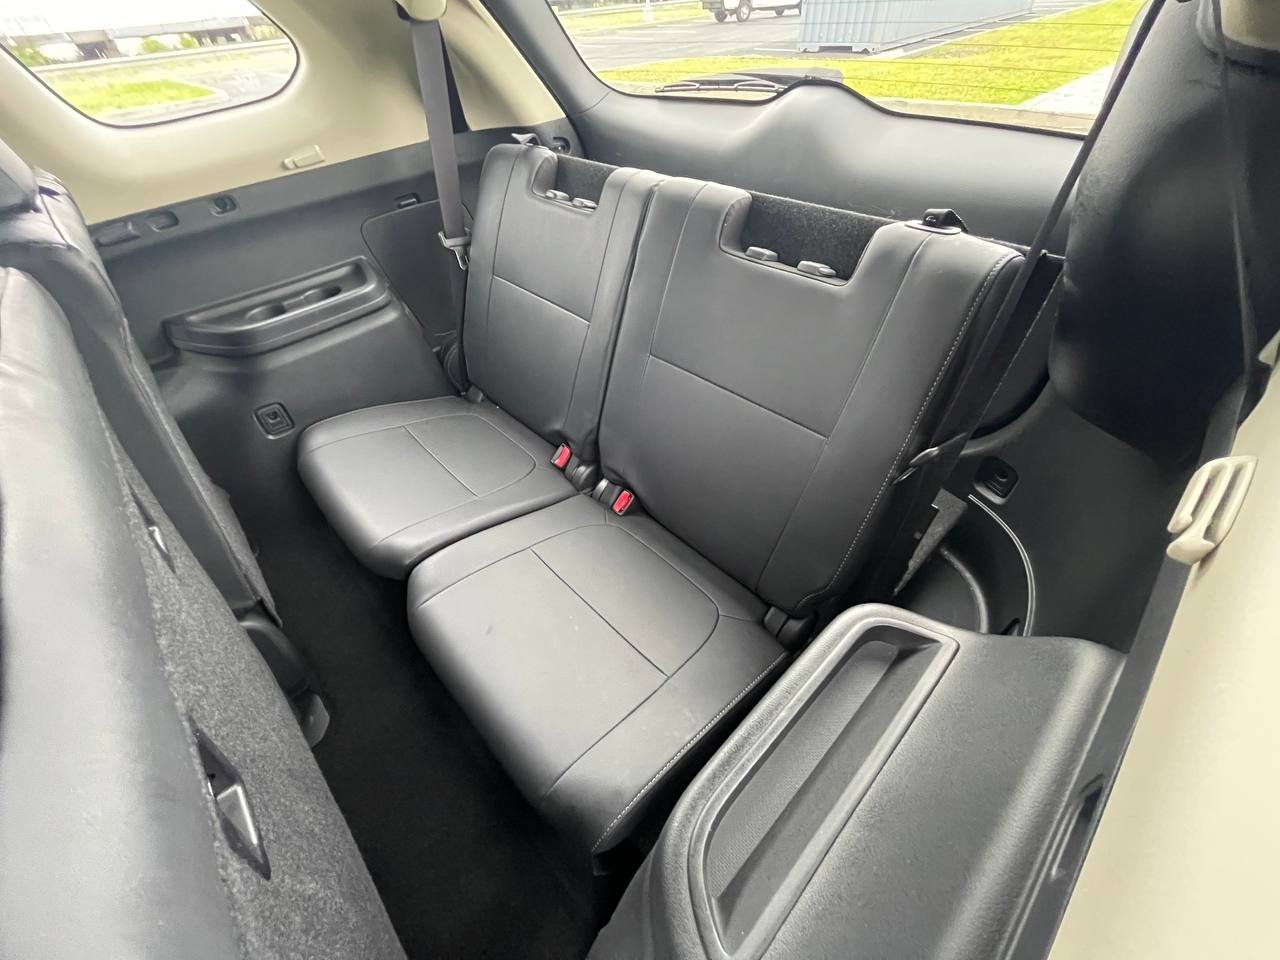 Used - Mitsubishi Outlander SEL SUV for sale in Staten Island NY